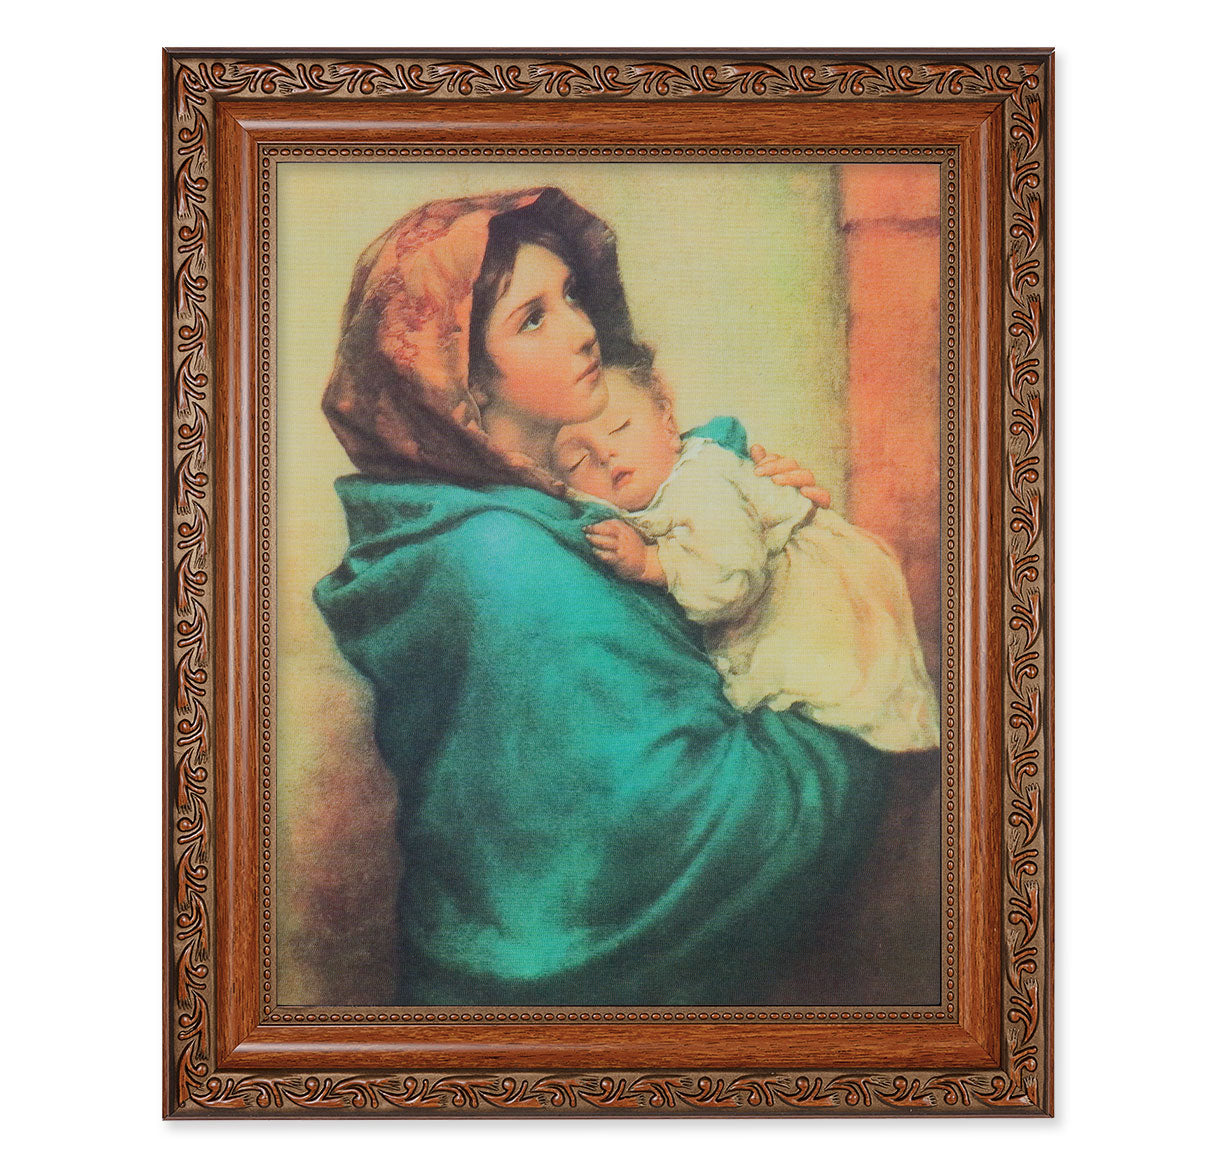 Madonna of the Streets Mahogany Finished Framed Art